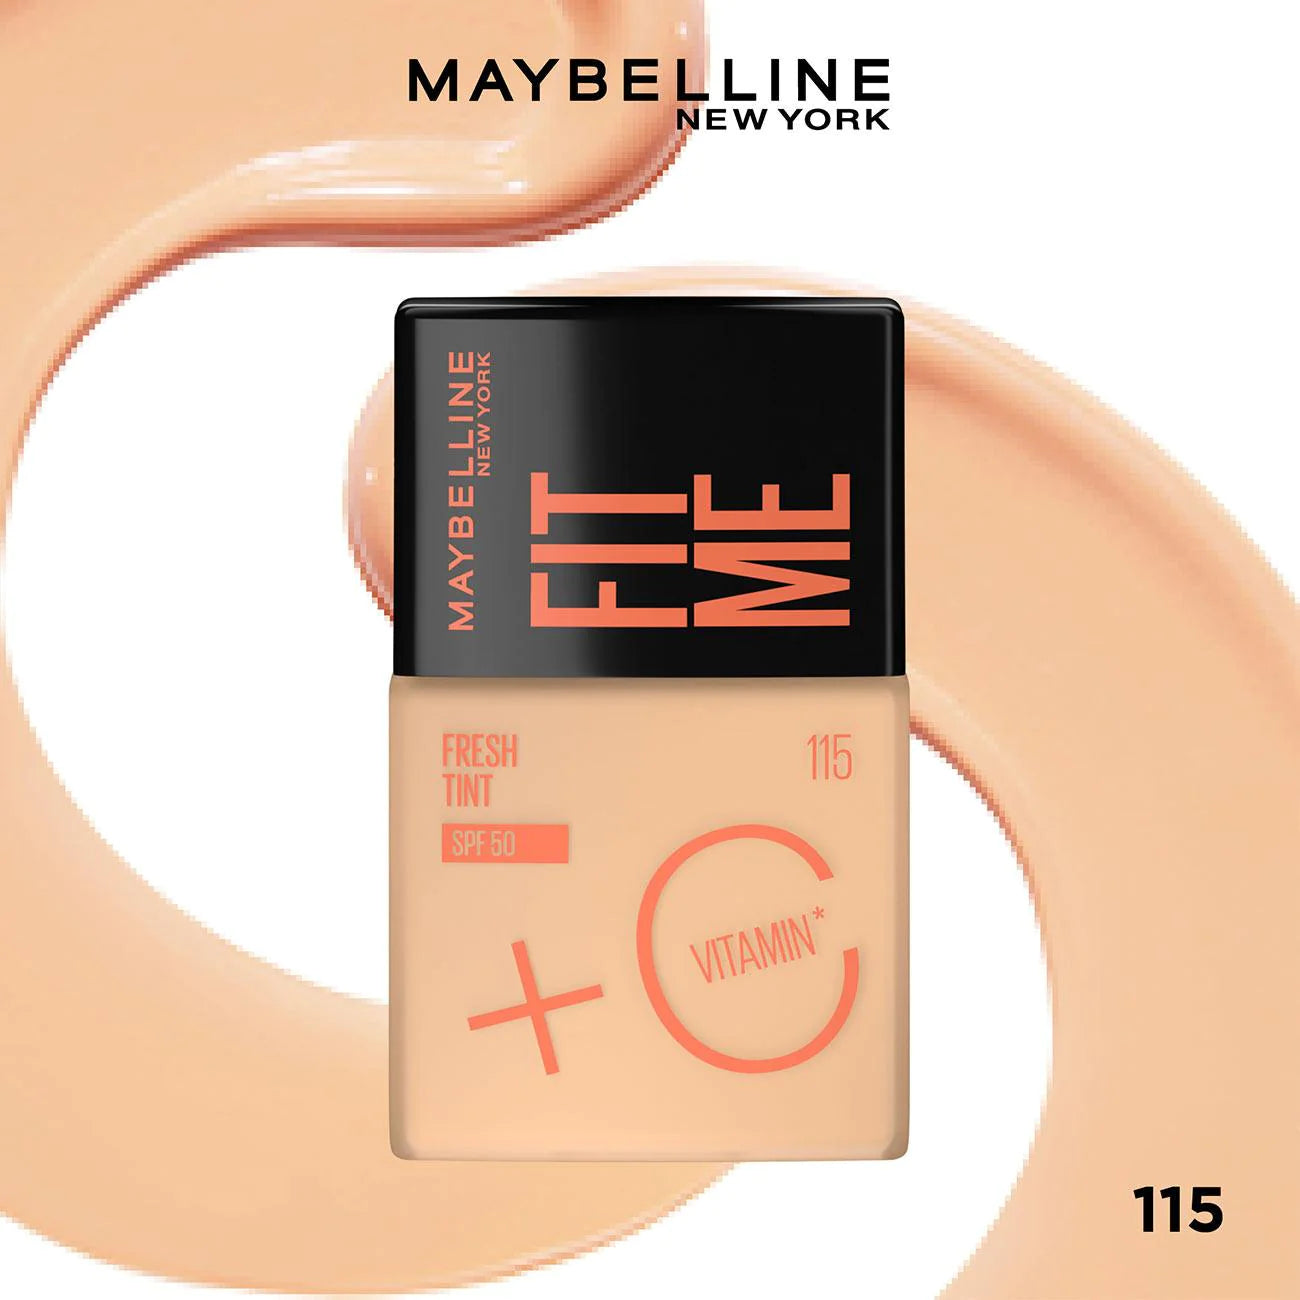 Maybelline New York Fit Me Fresh Tint SPF50